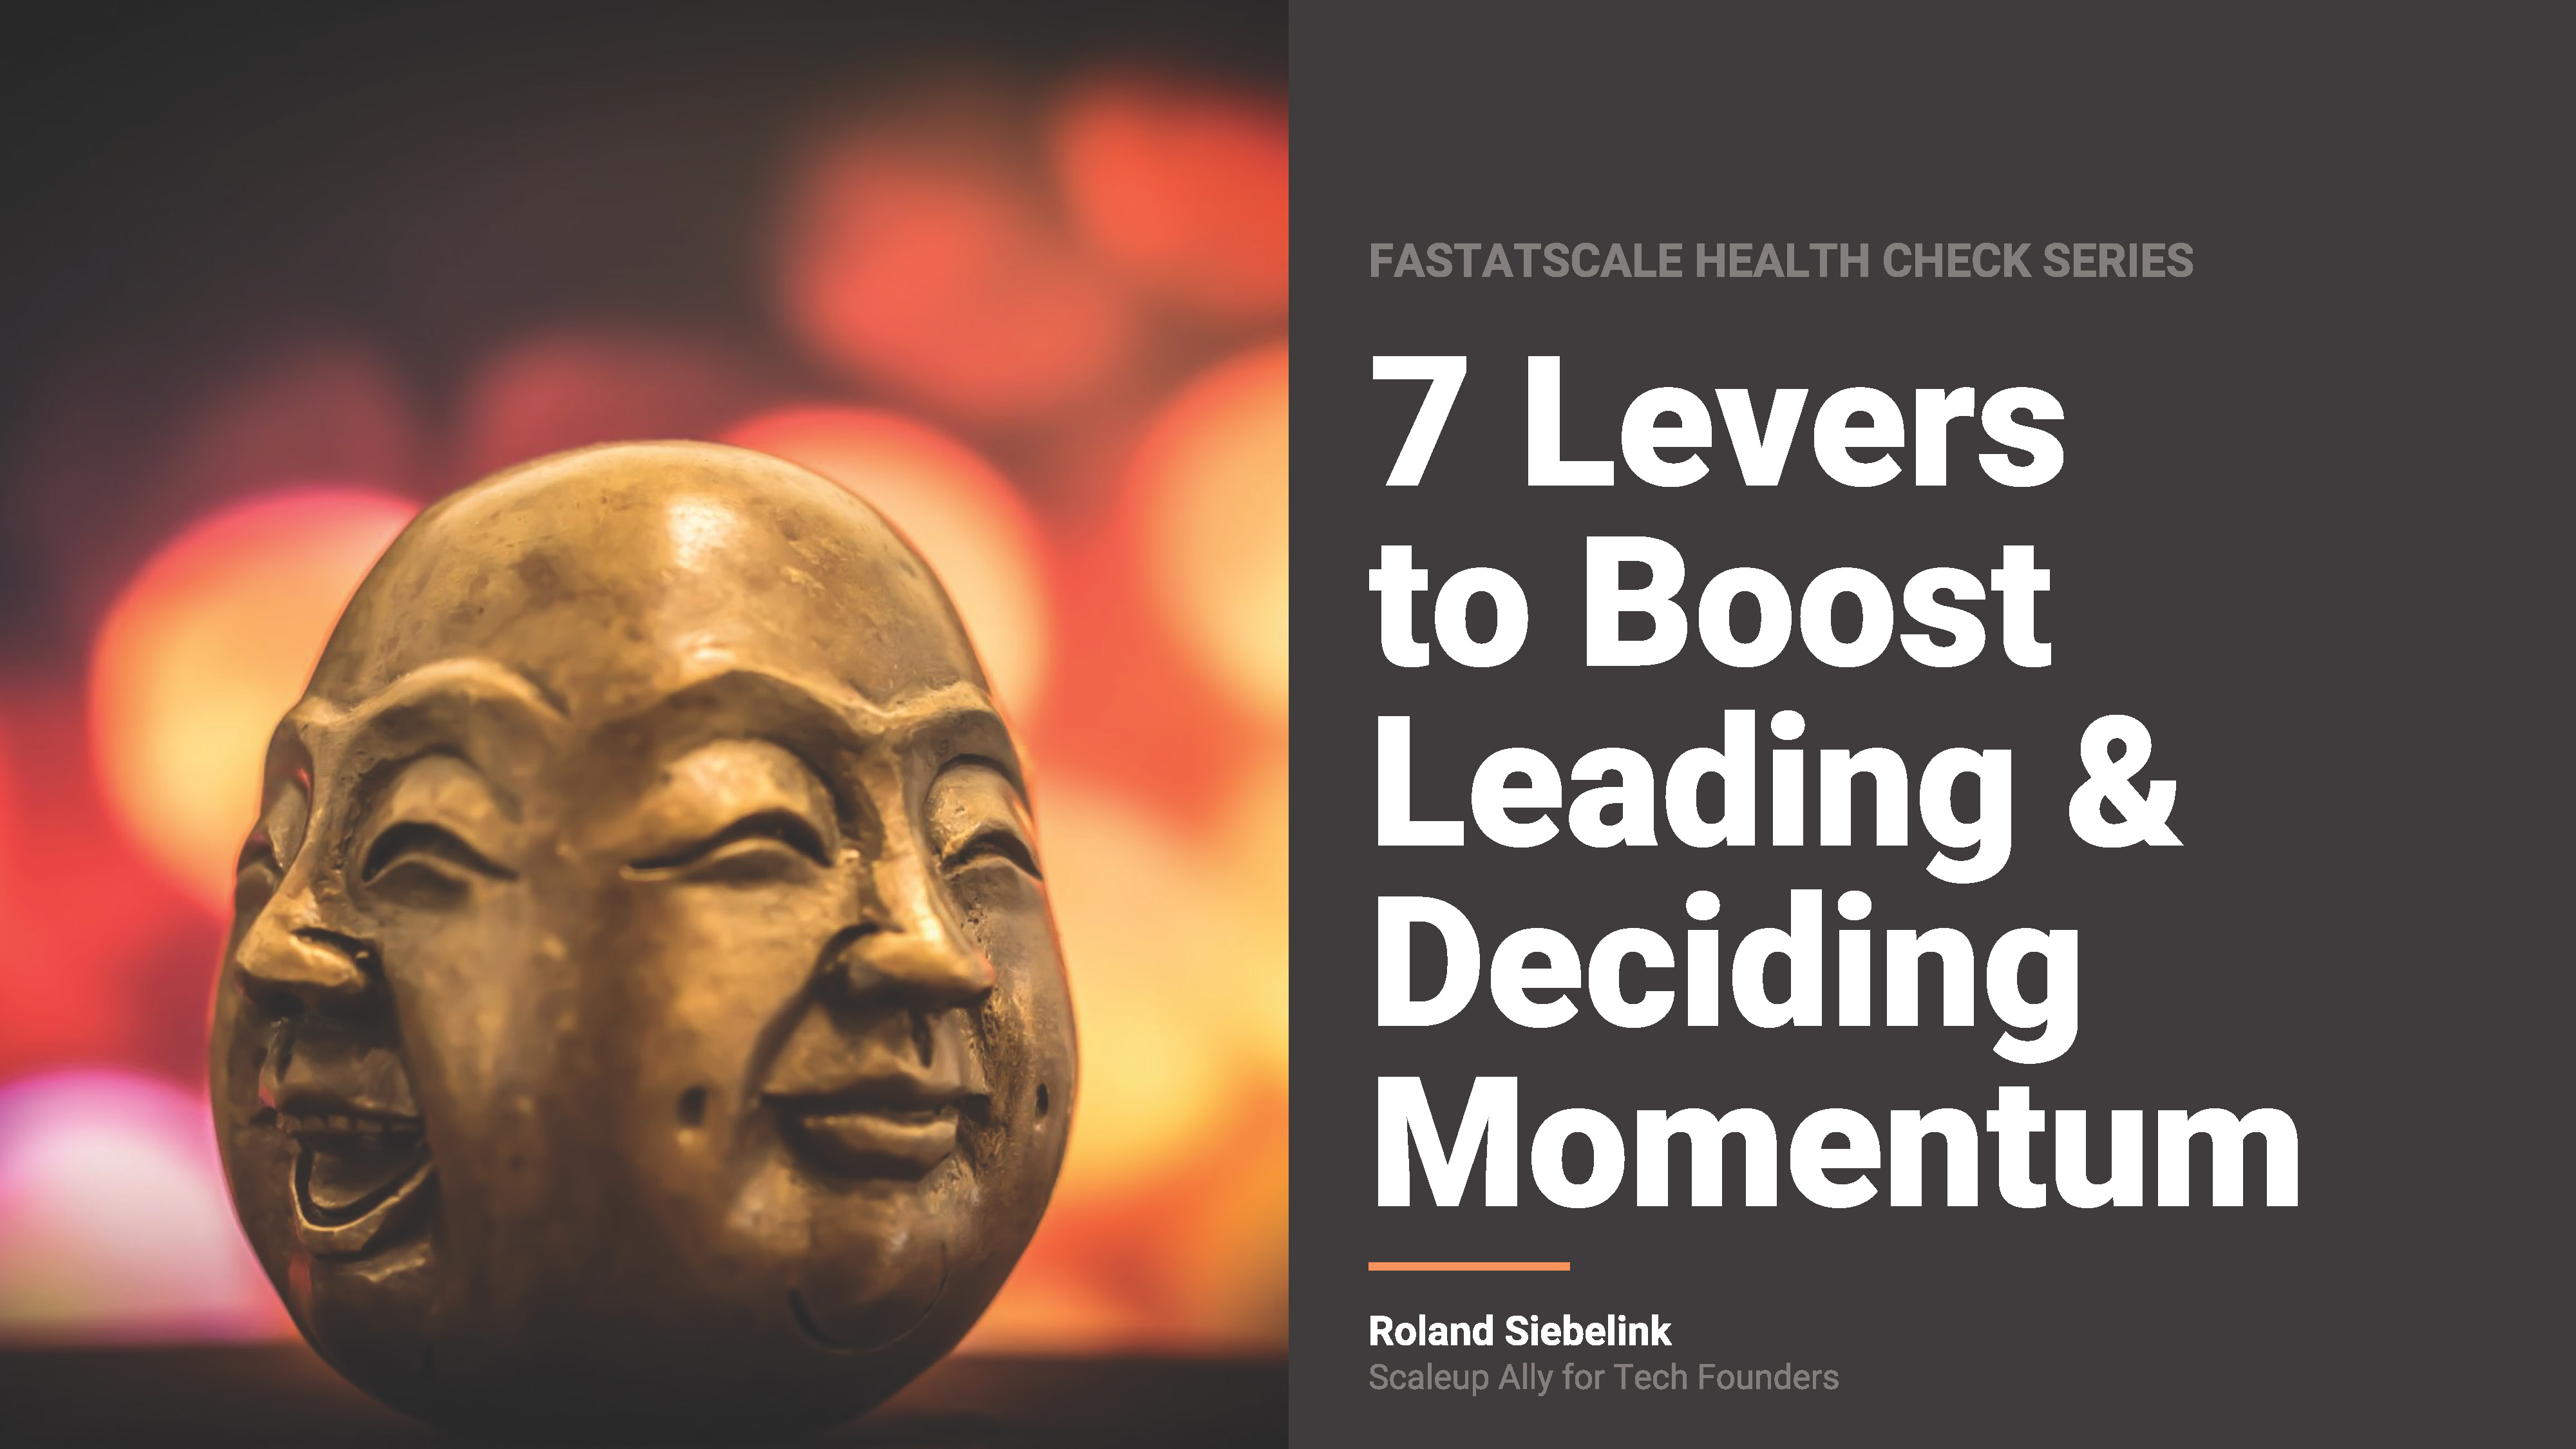 7 Levers to Boost Leading & Deciding Momentum Strategic Leadership: Elevating Decision-Making and Unity Within Executive Teams